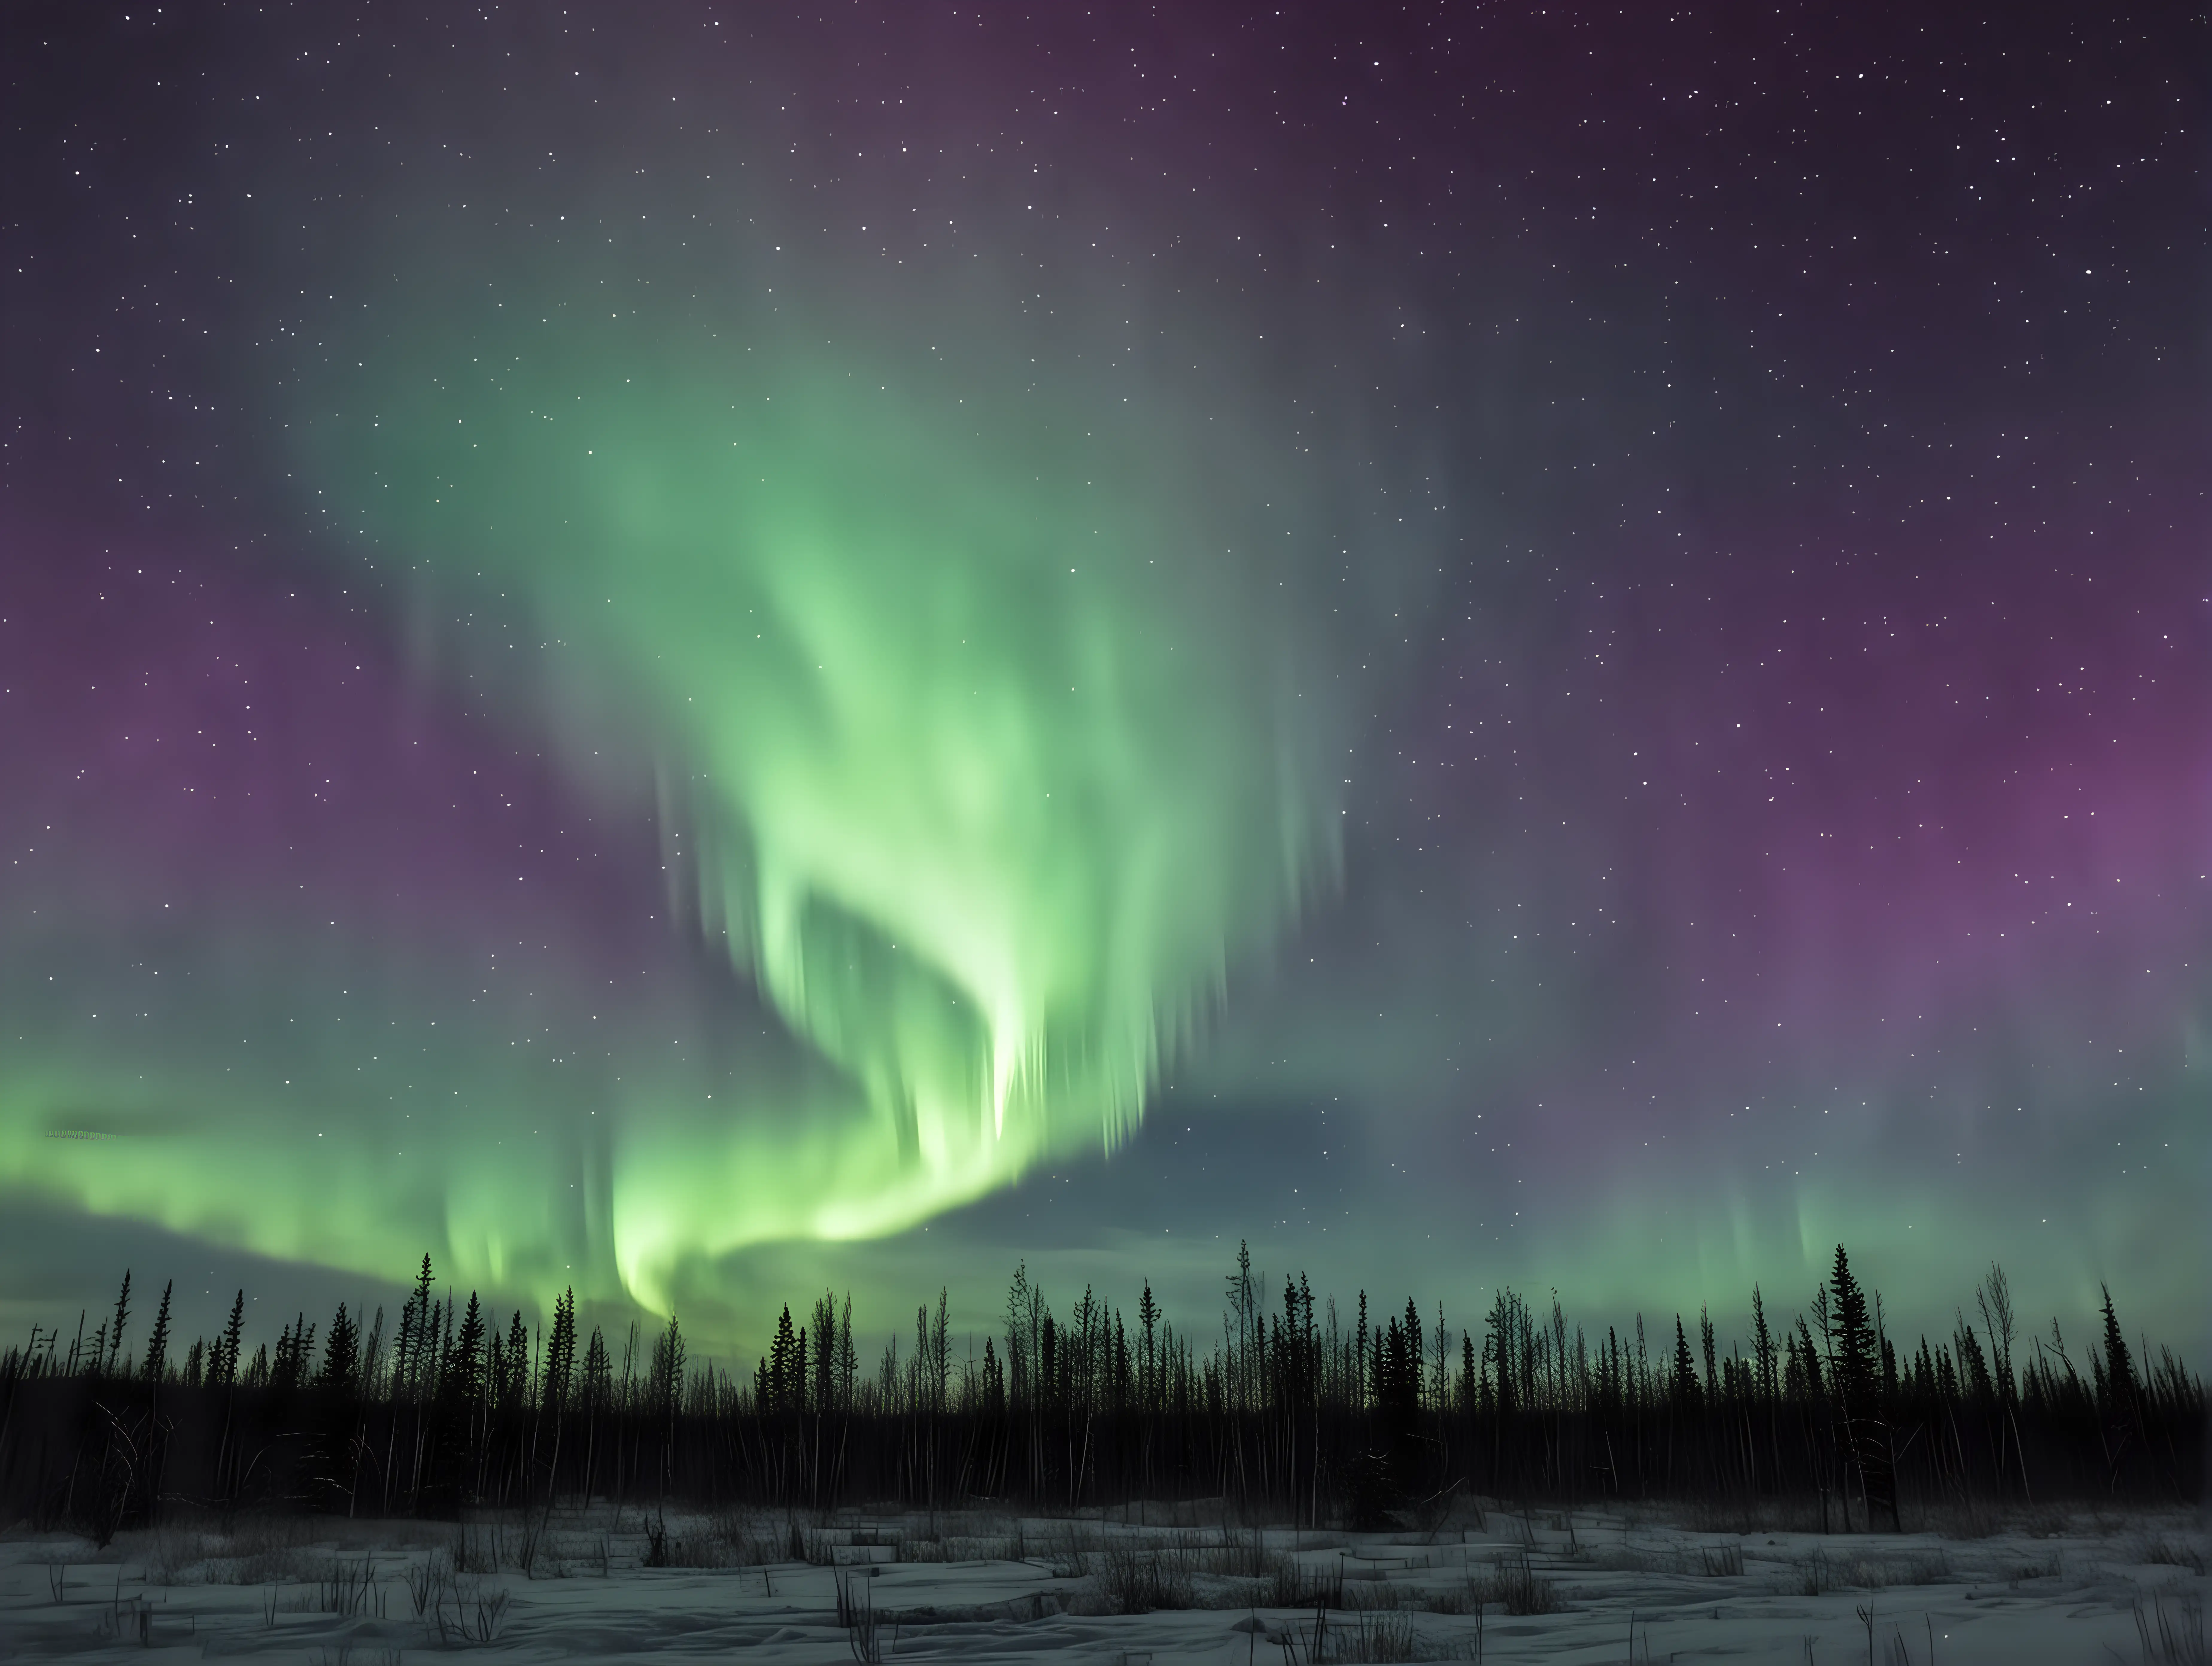 Sky Only View of Northern Lights in Purplish and Greenish Colors